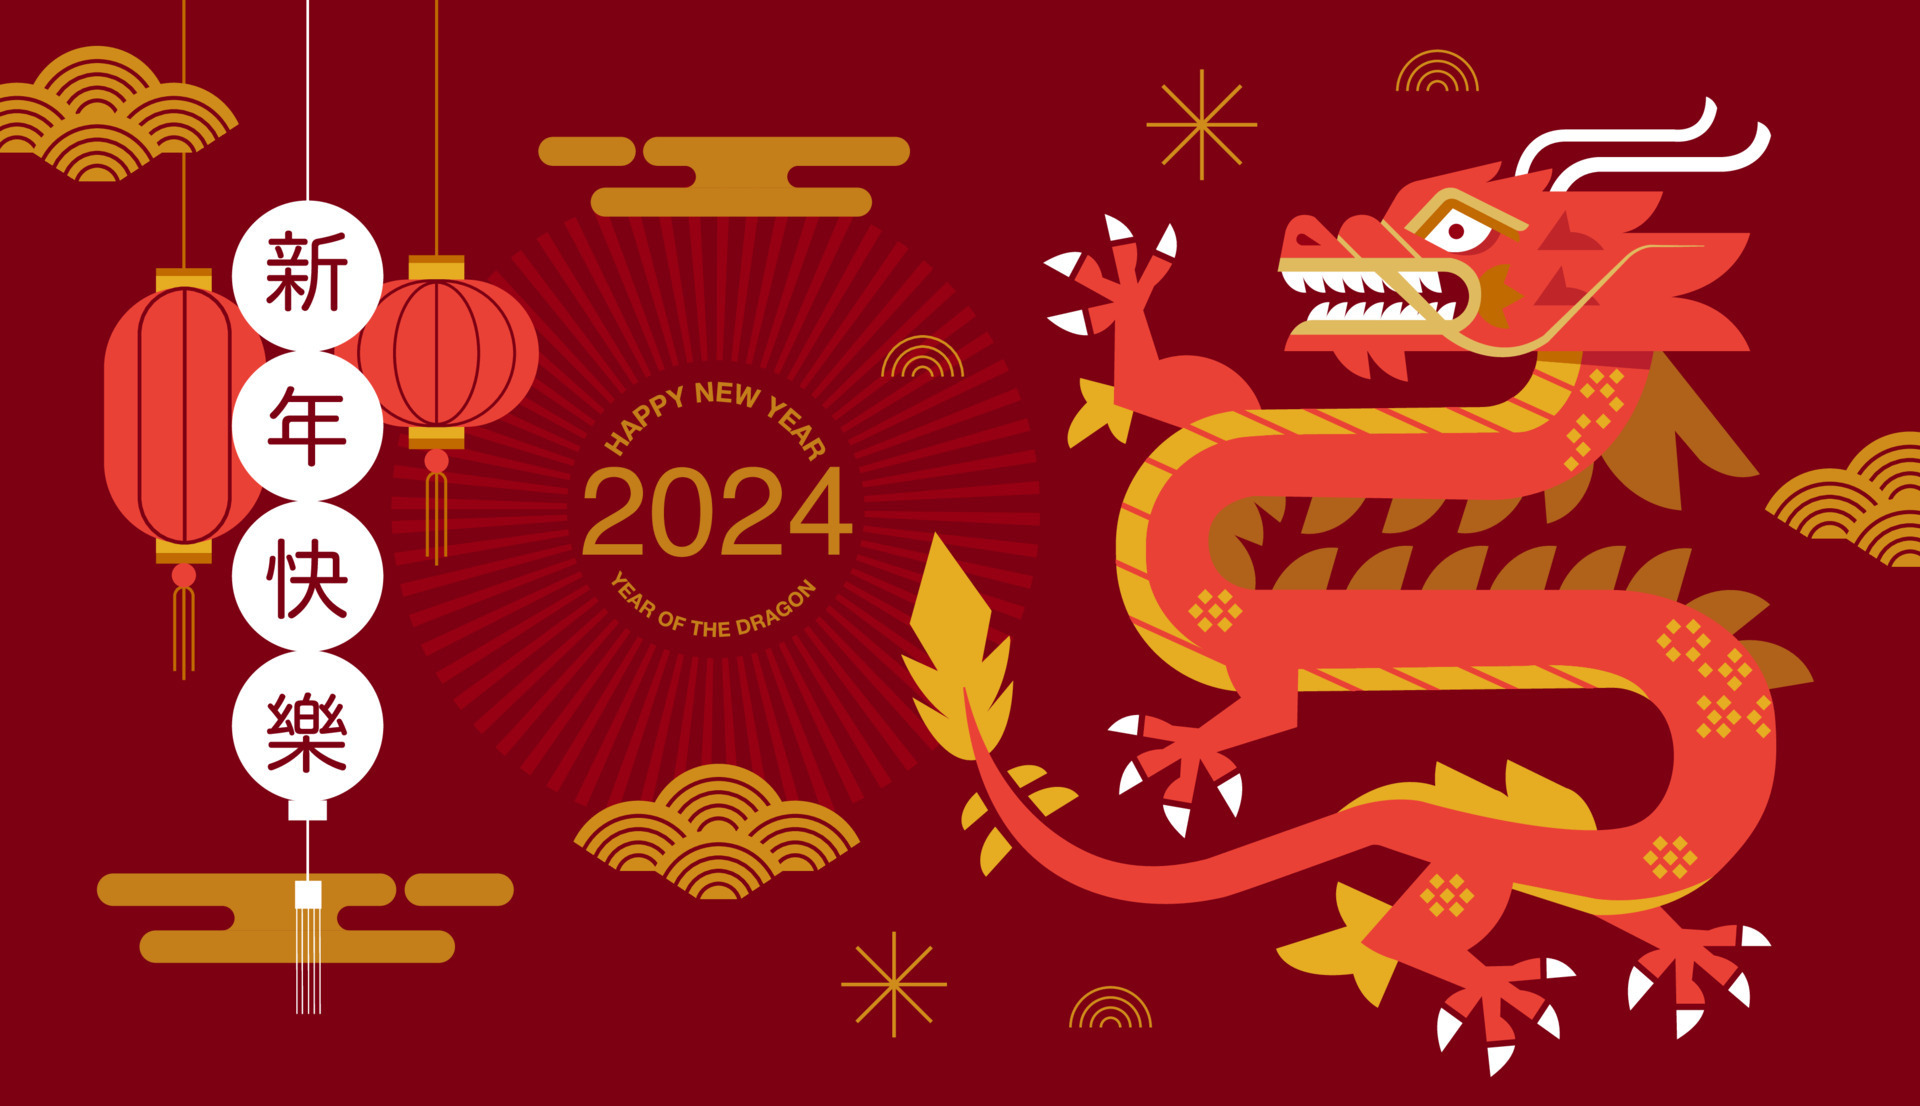 Lunar New Year 2024 Shoes Image to u